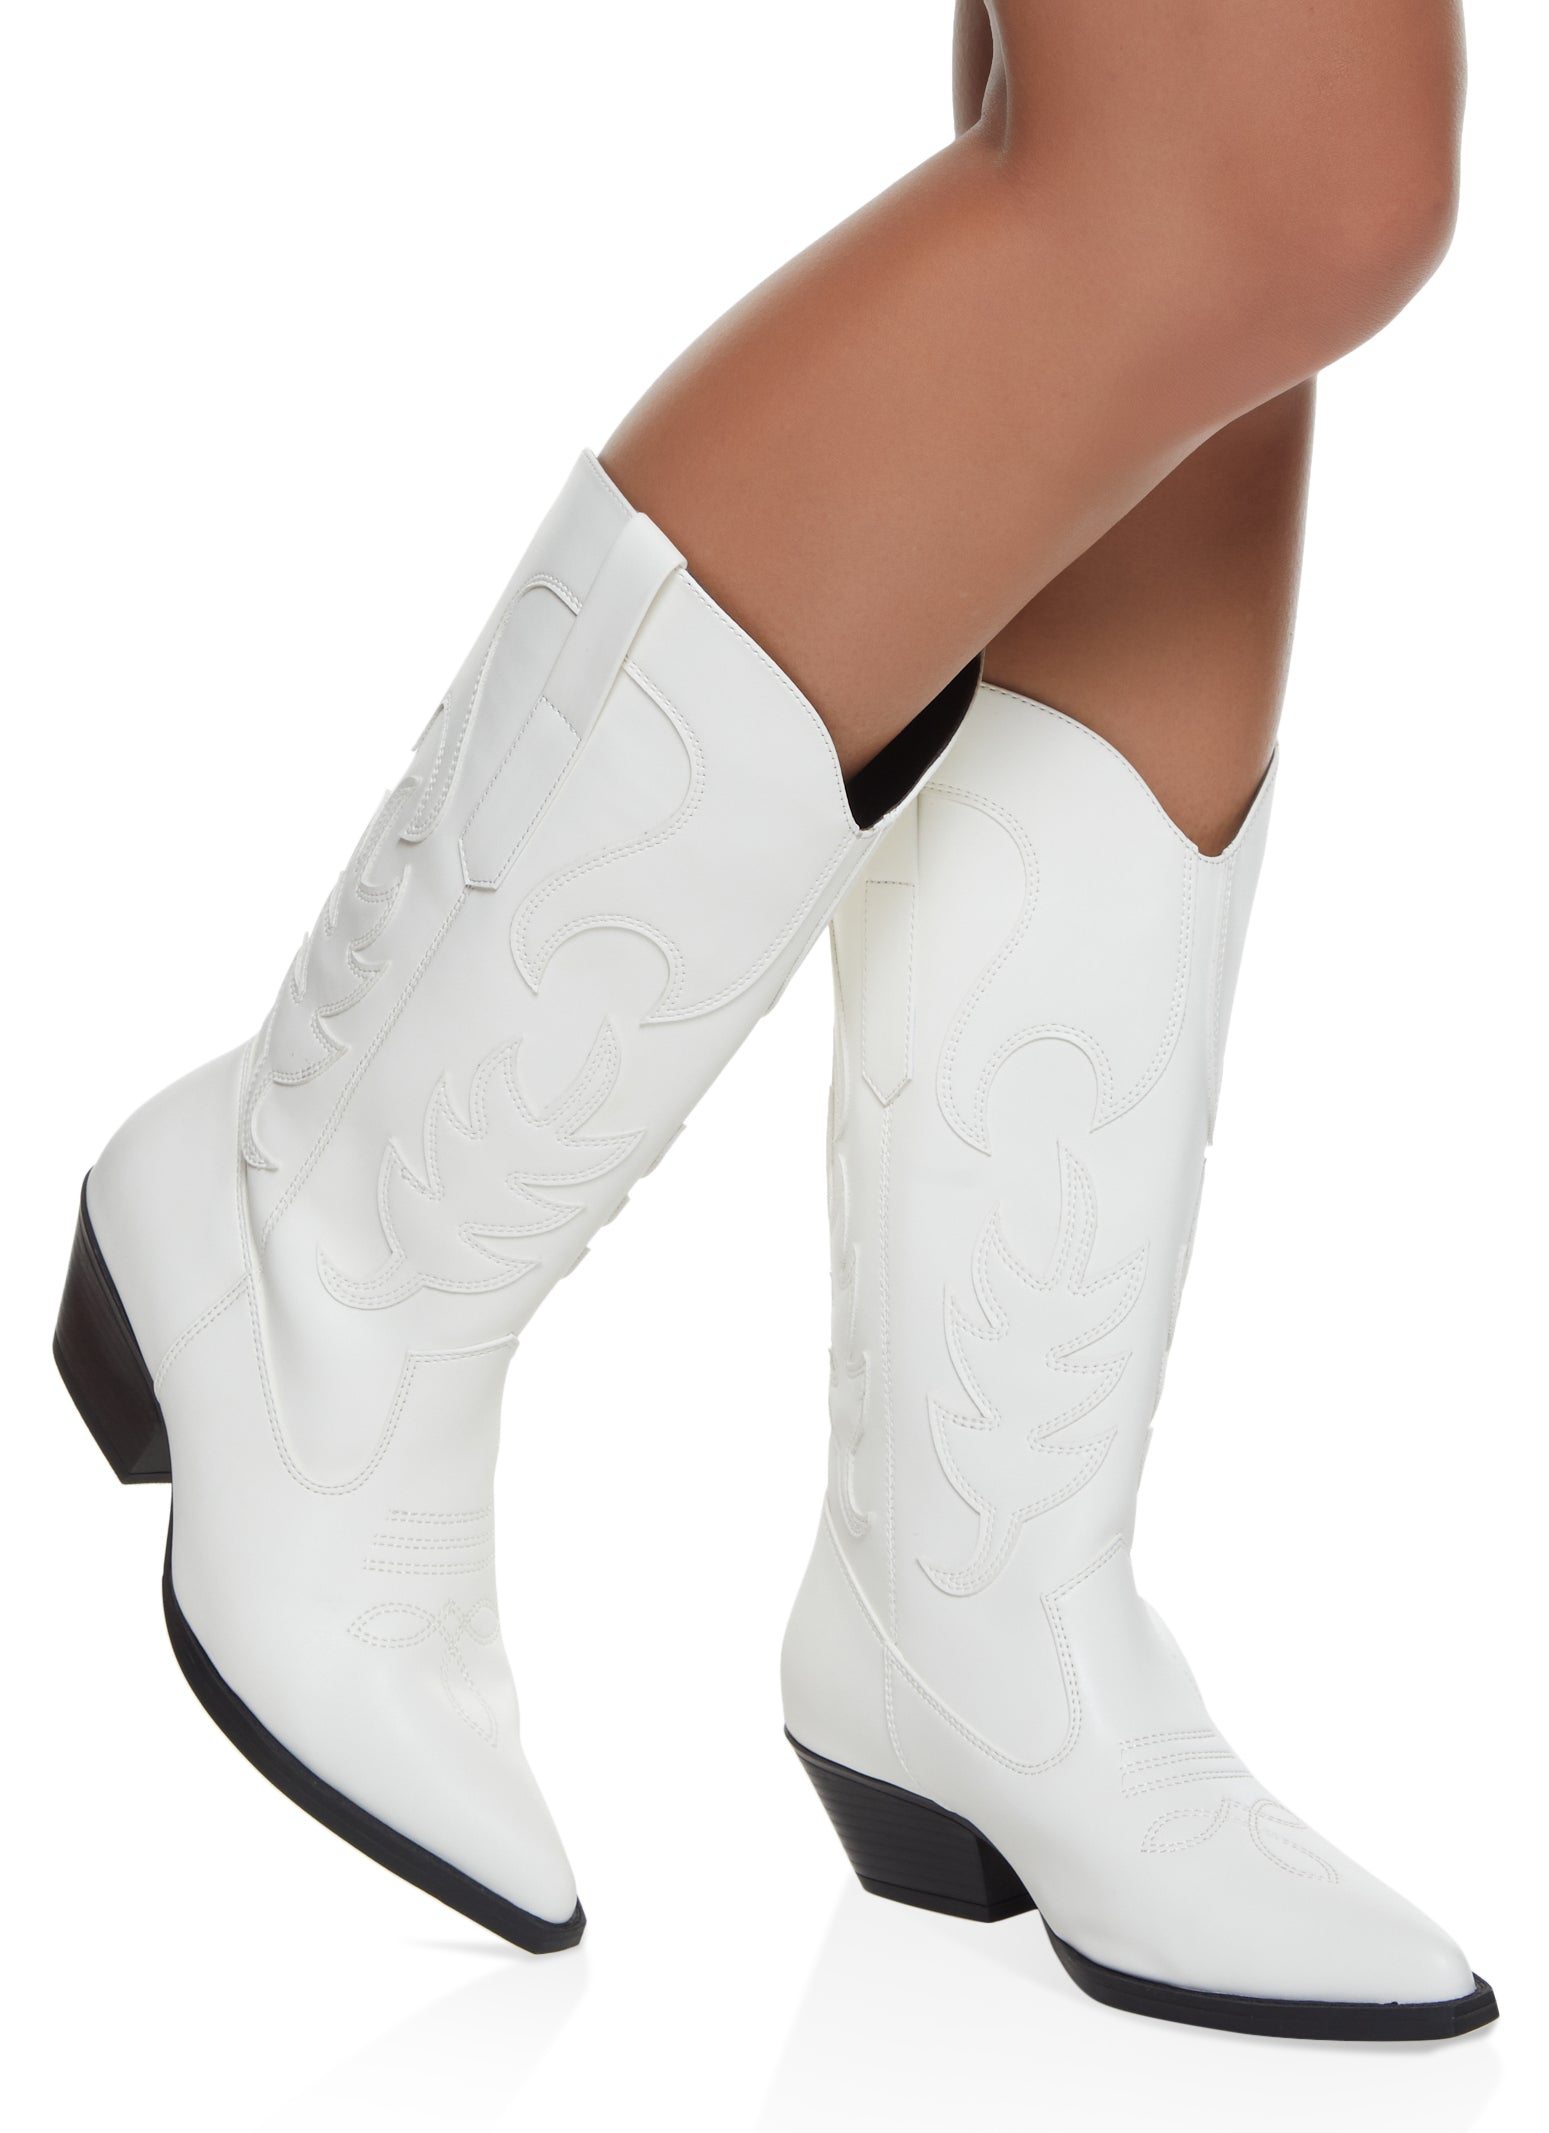 Pointed Toe Cowboy Boots